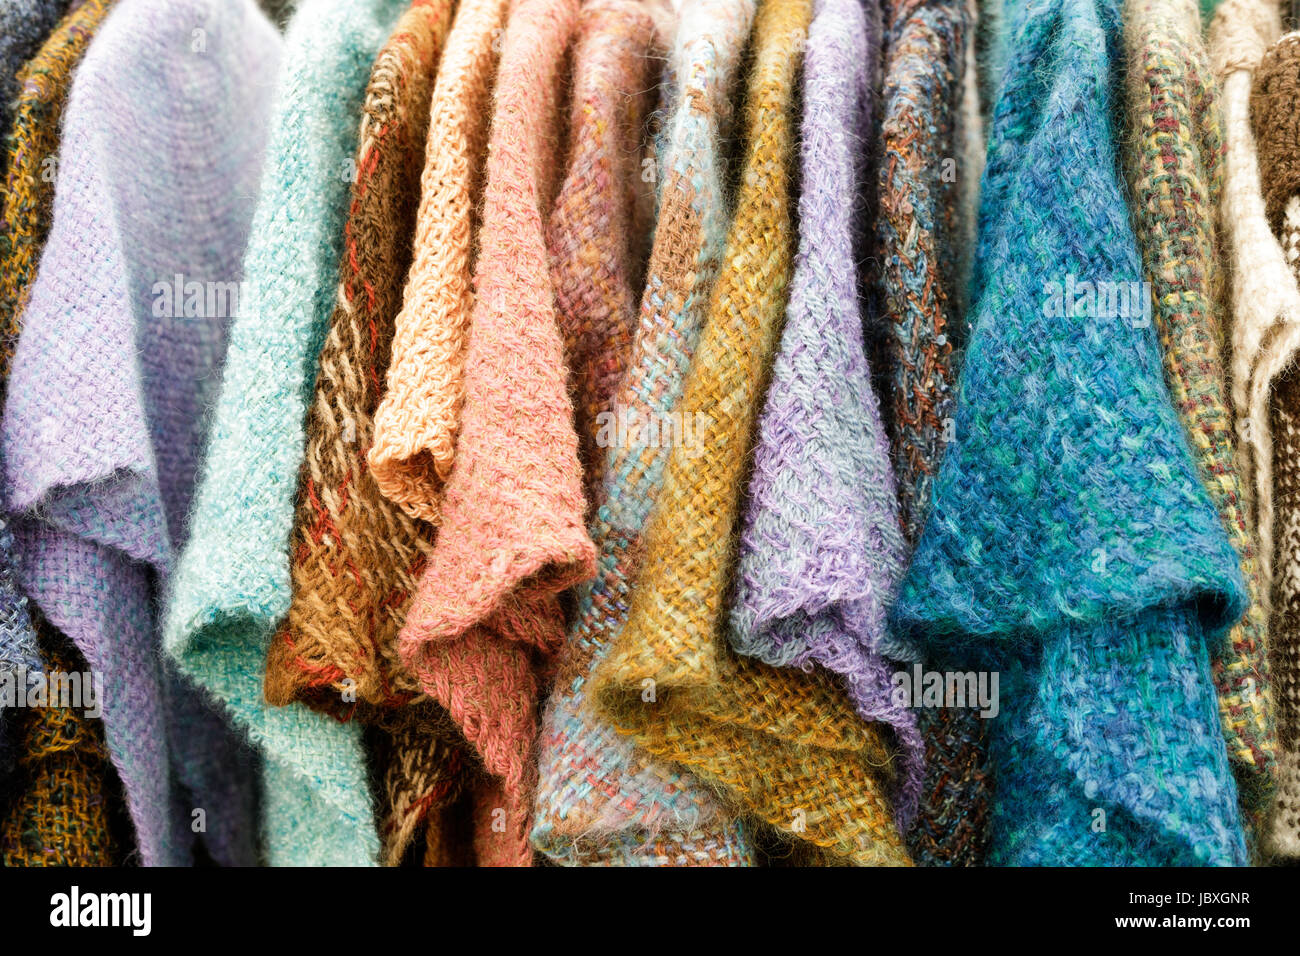 BOUCKVILLE, NY, USA - JUNE 10 2017: Hand woven capes for sale at the annual Fiber Festival of Central New York. Stock Photo